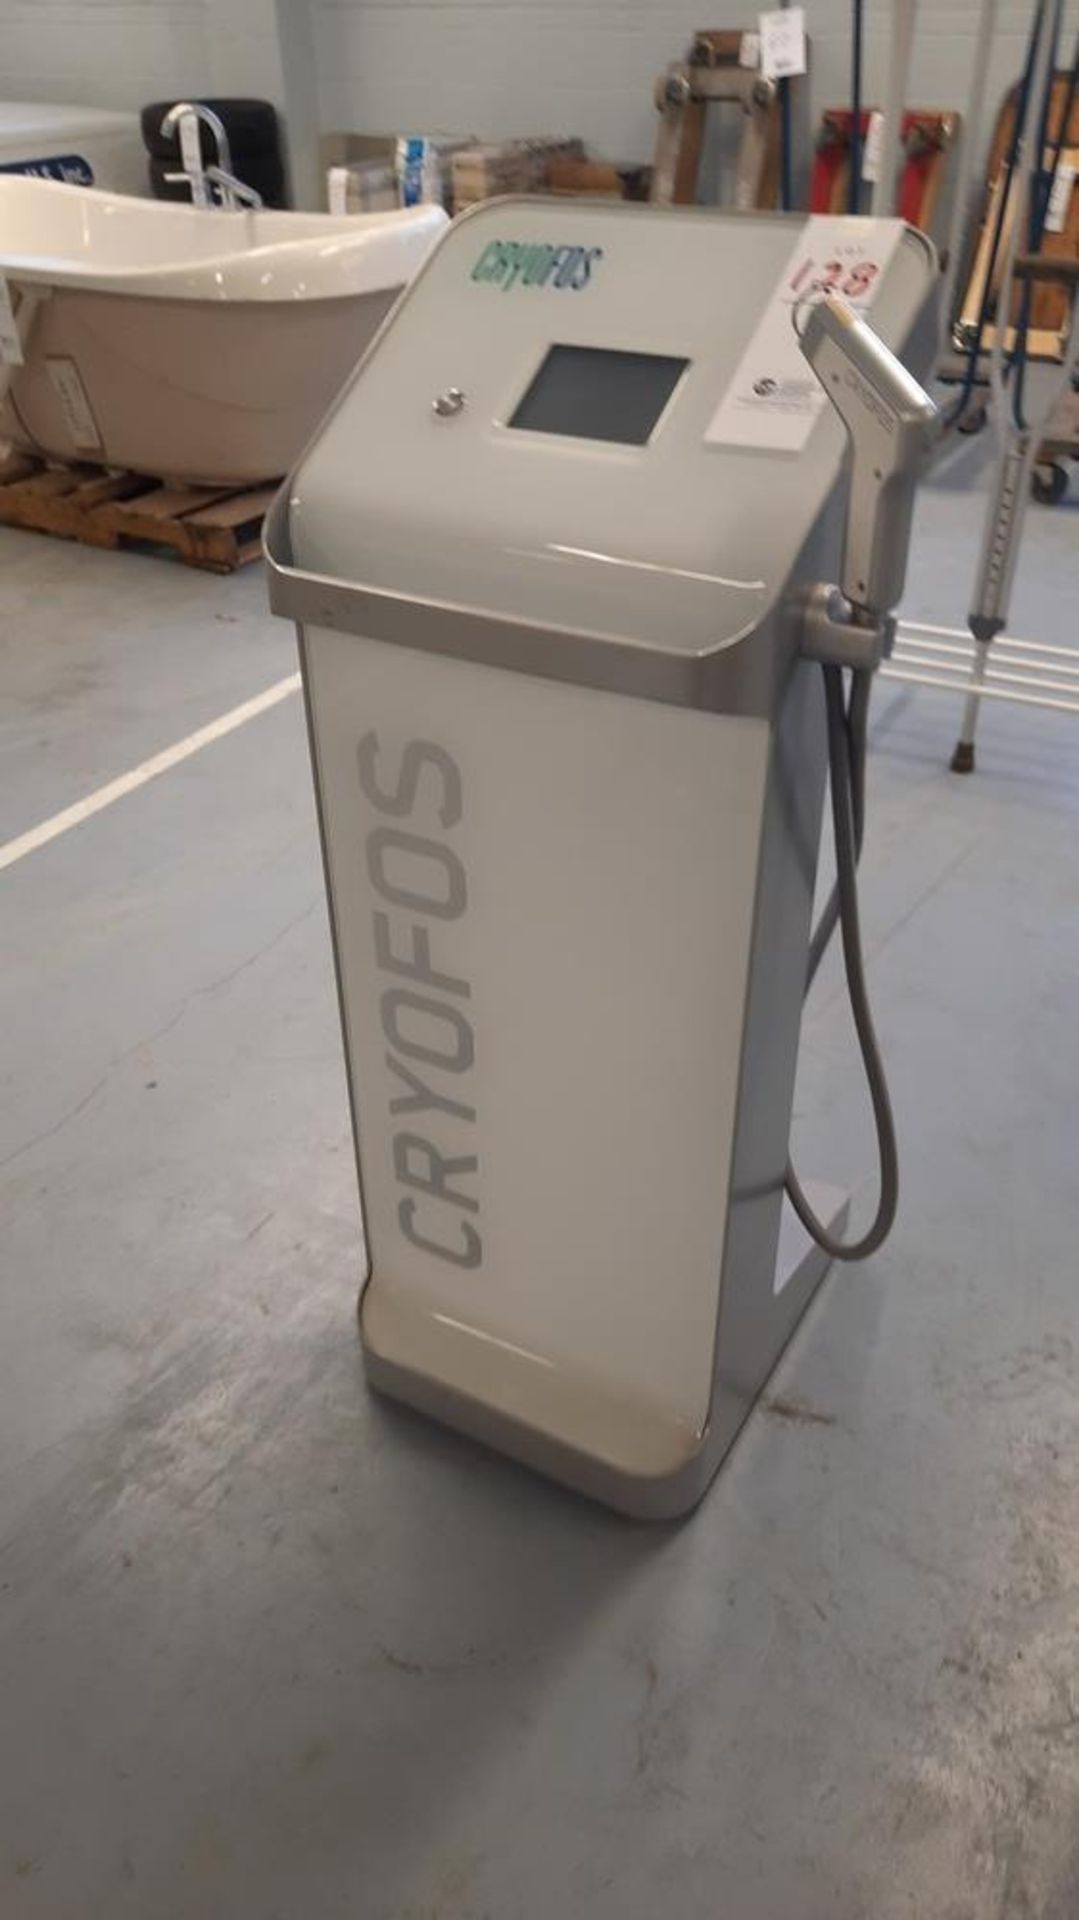 CRYOFOS MEDUP Cryotherapy Device, mod: -220, s/n 3129